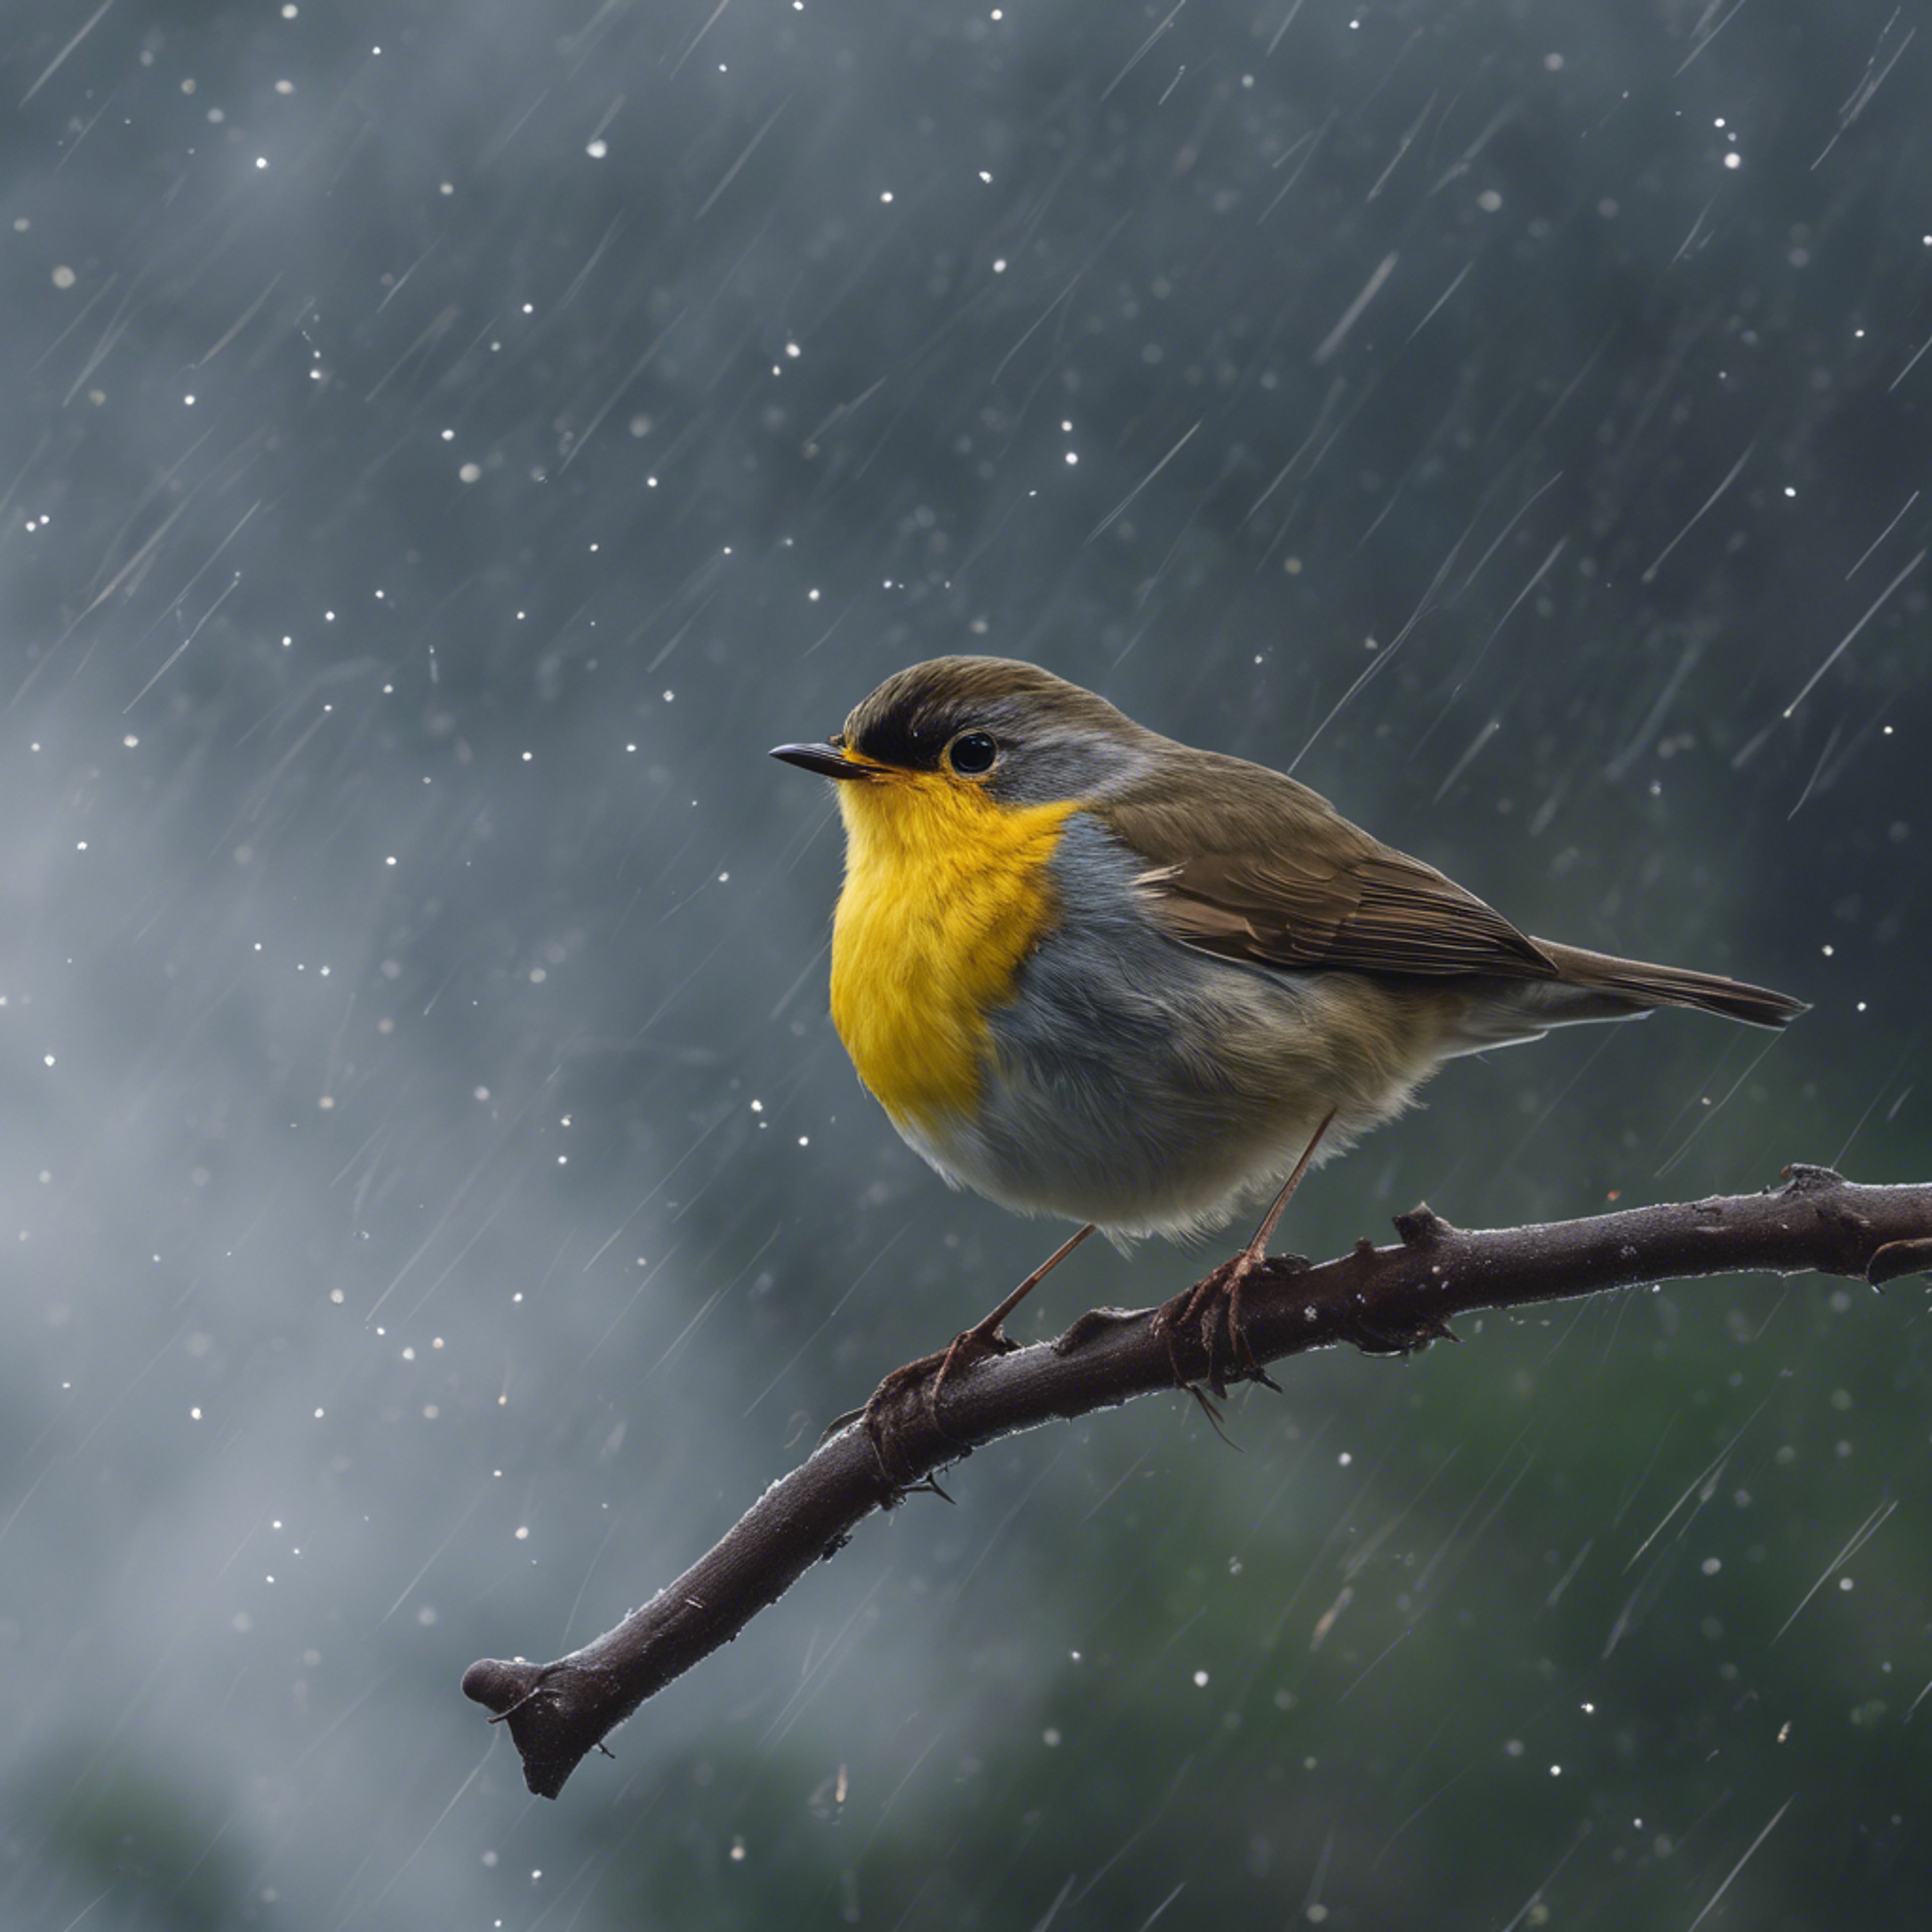 A yellow-breasted robin in mid-flight against a dark, stormy sky. Tapet[14716aee78274faeac04]